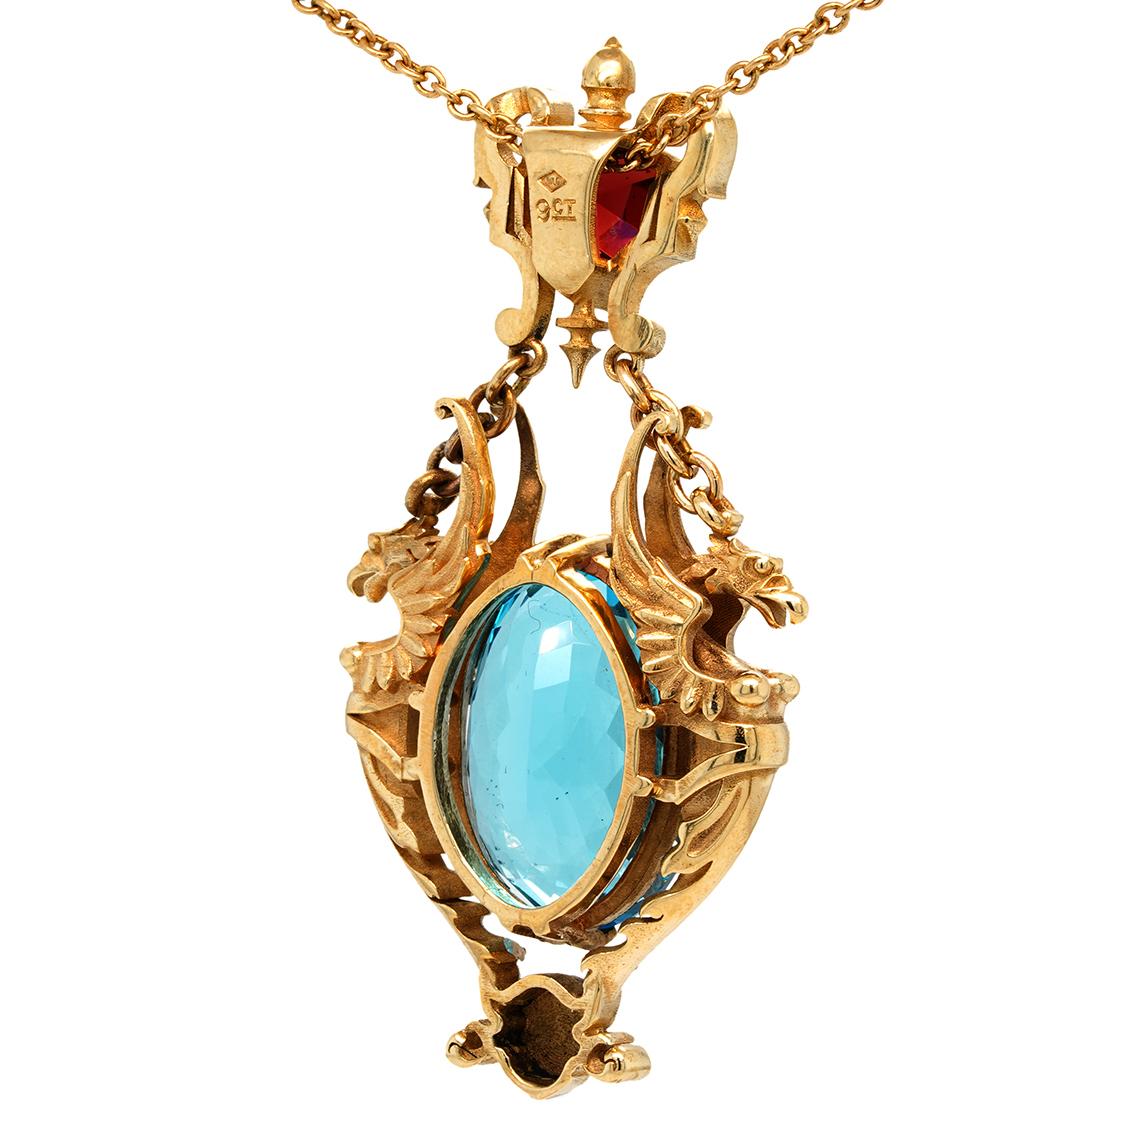 Victorian 28ct Oval Swiss Blue Topaz, Garnet 9k Yellow Gold Antique Style Pendant Necklace For Sale